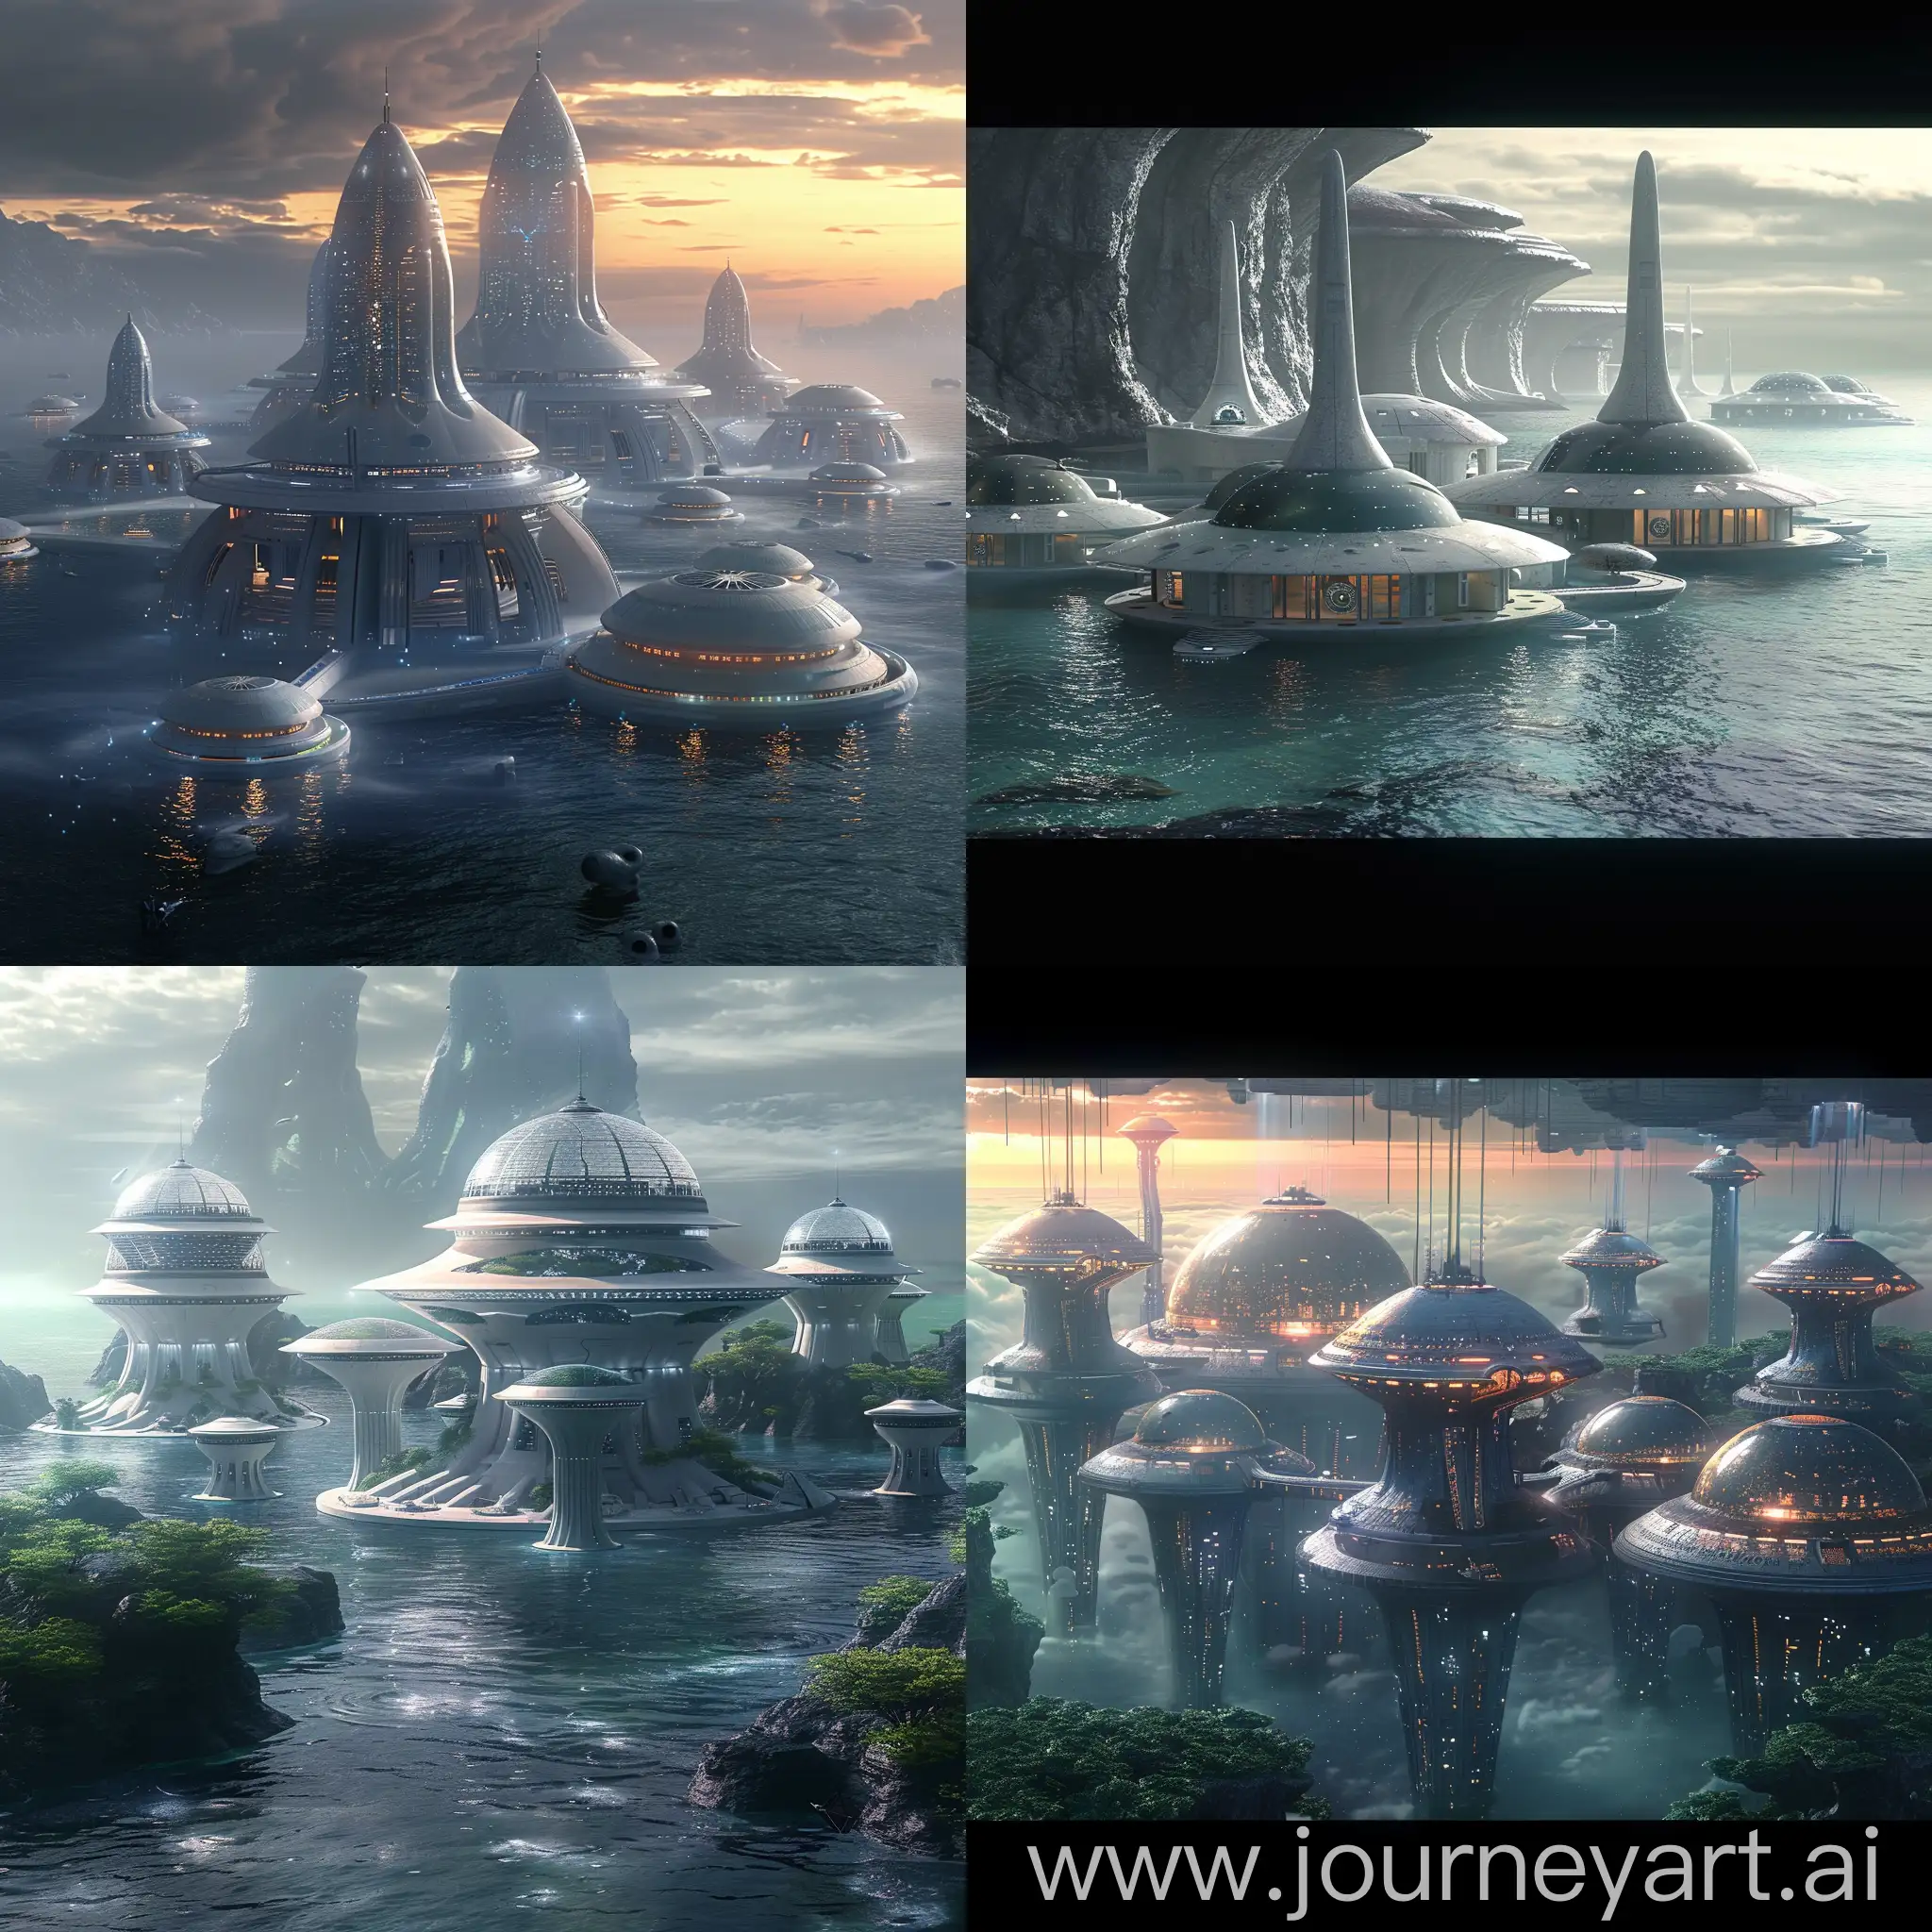 Futuristic-Star-Wars-Kamino-Sustainable-Energy-Vertical-Farming-and-Advanced-Technology